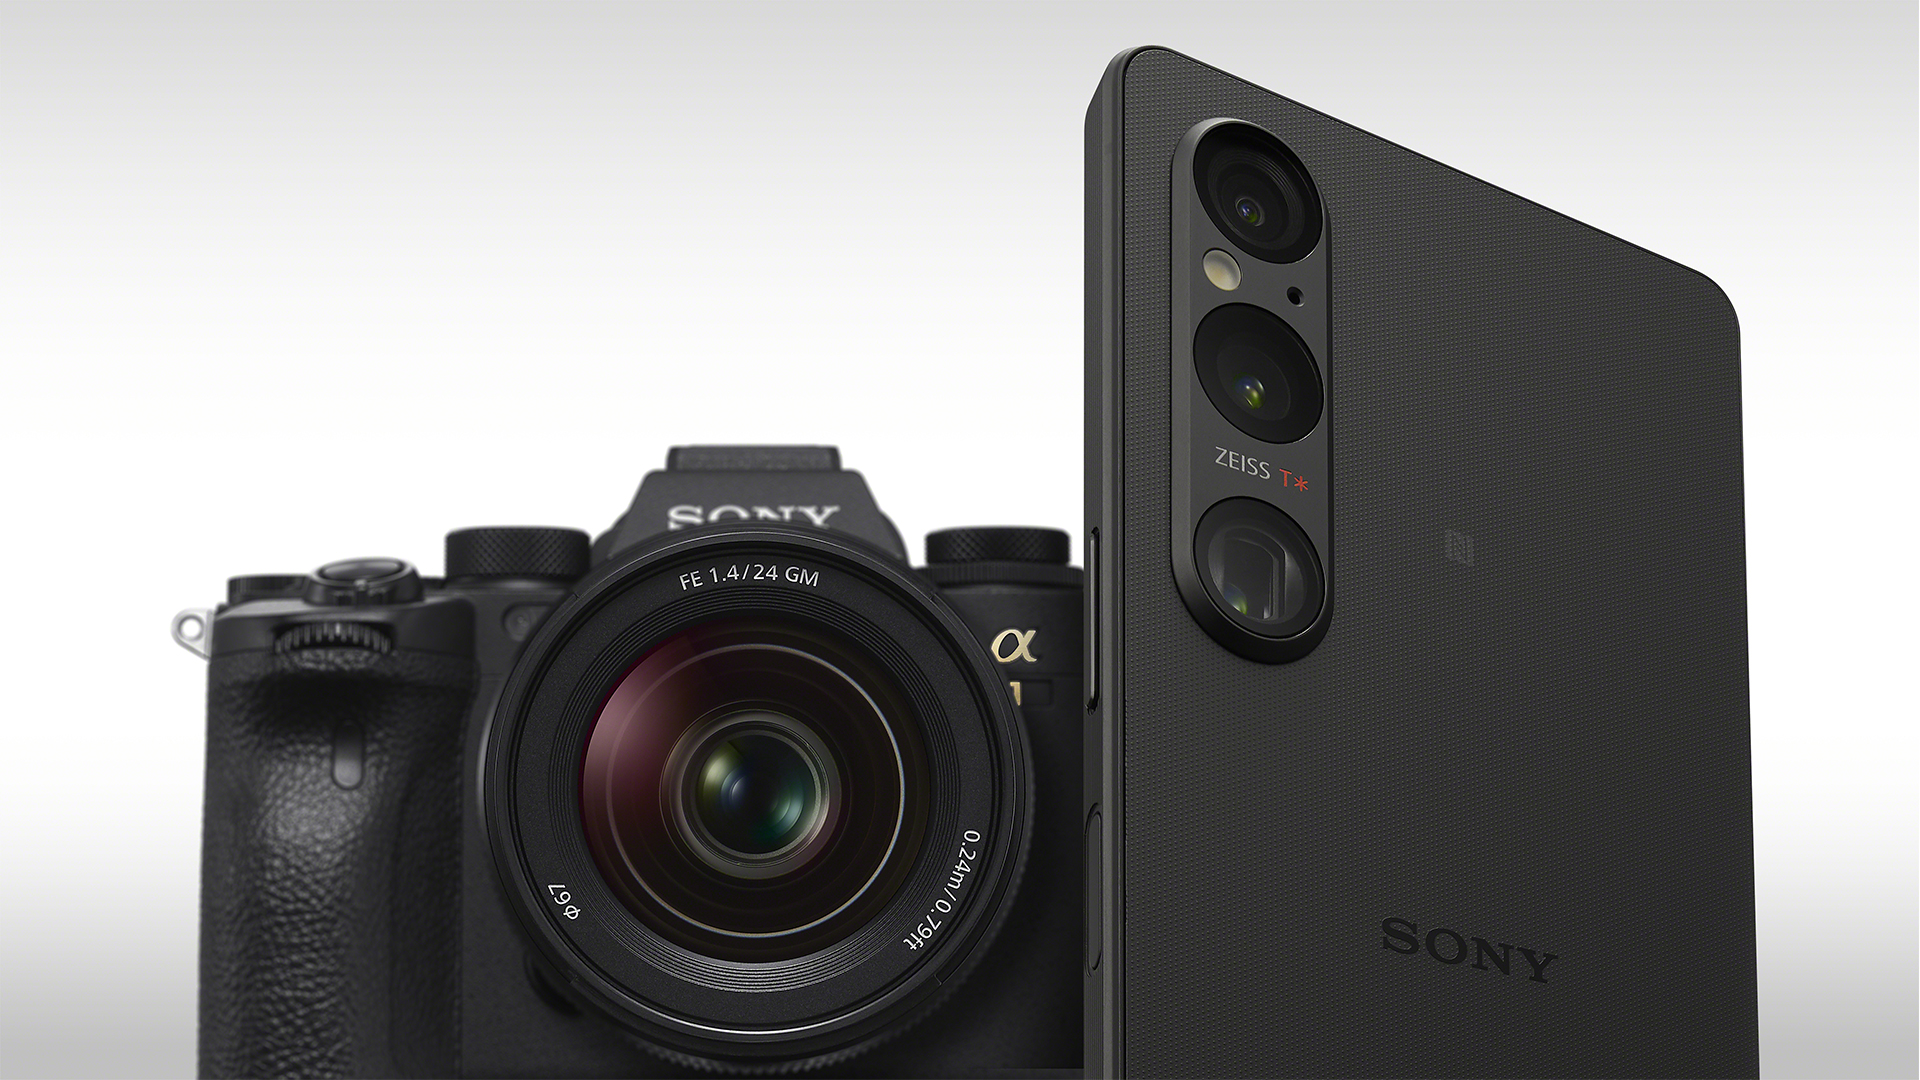 Sony reveals Xperia 1 V with pro features for video - Videomaker